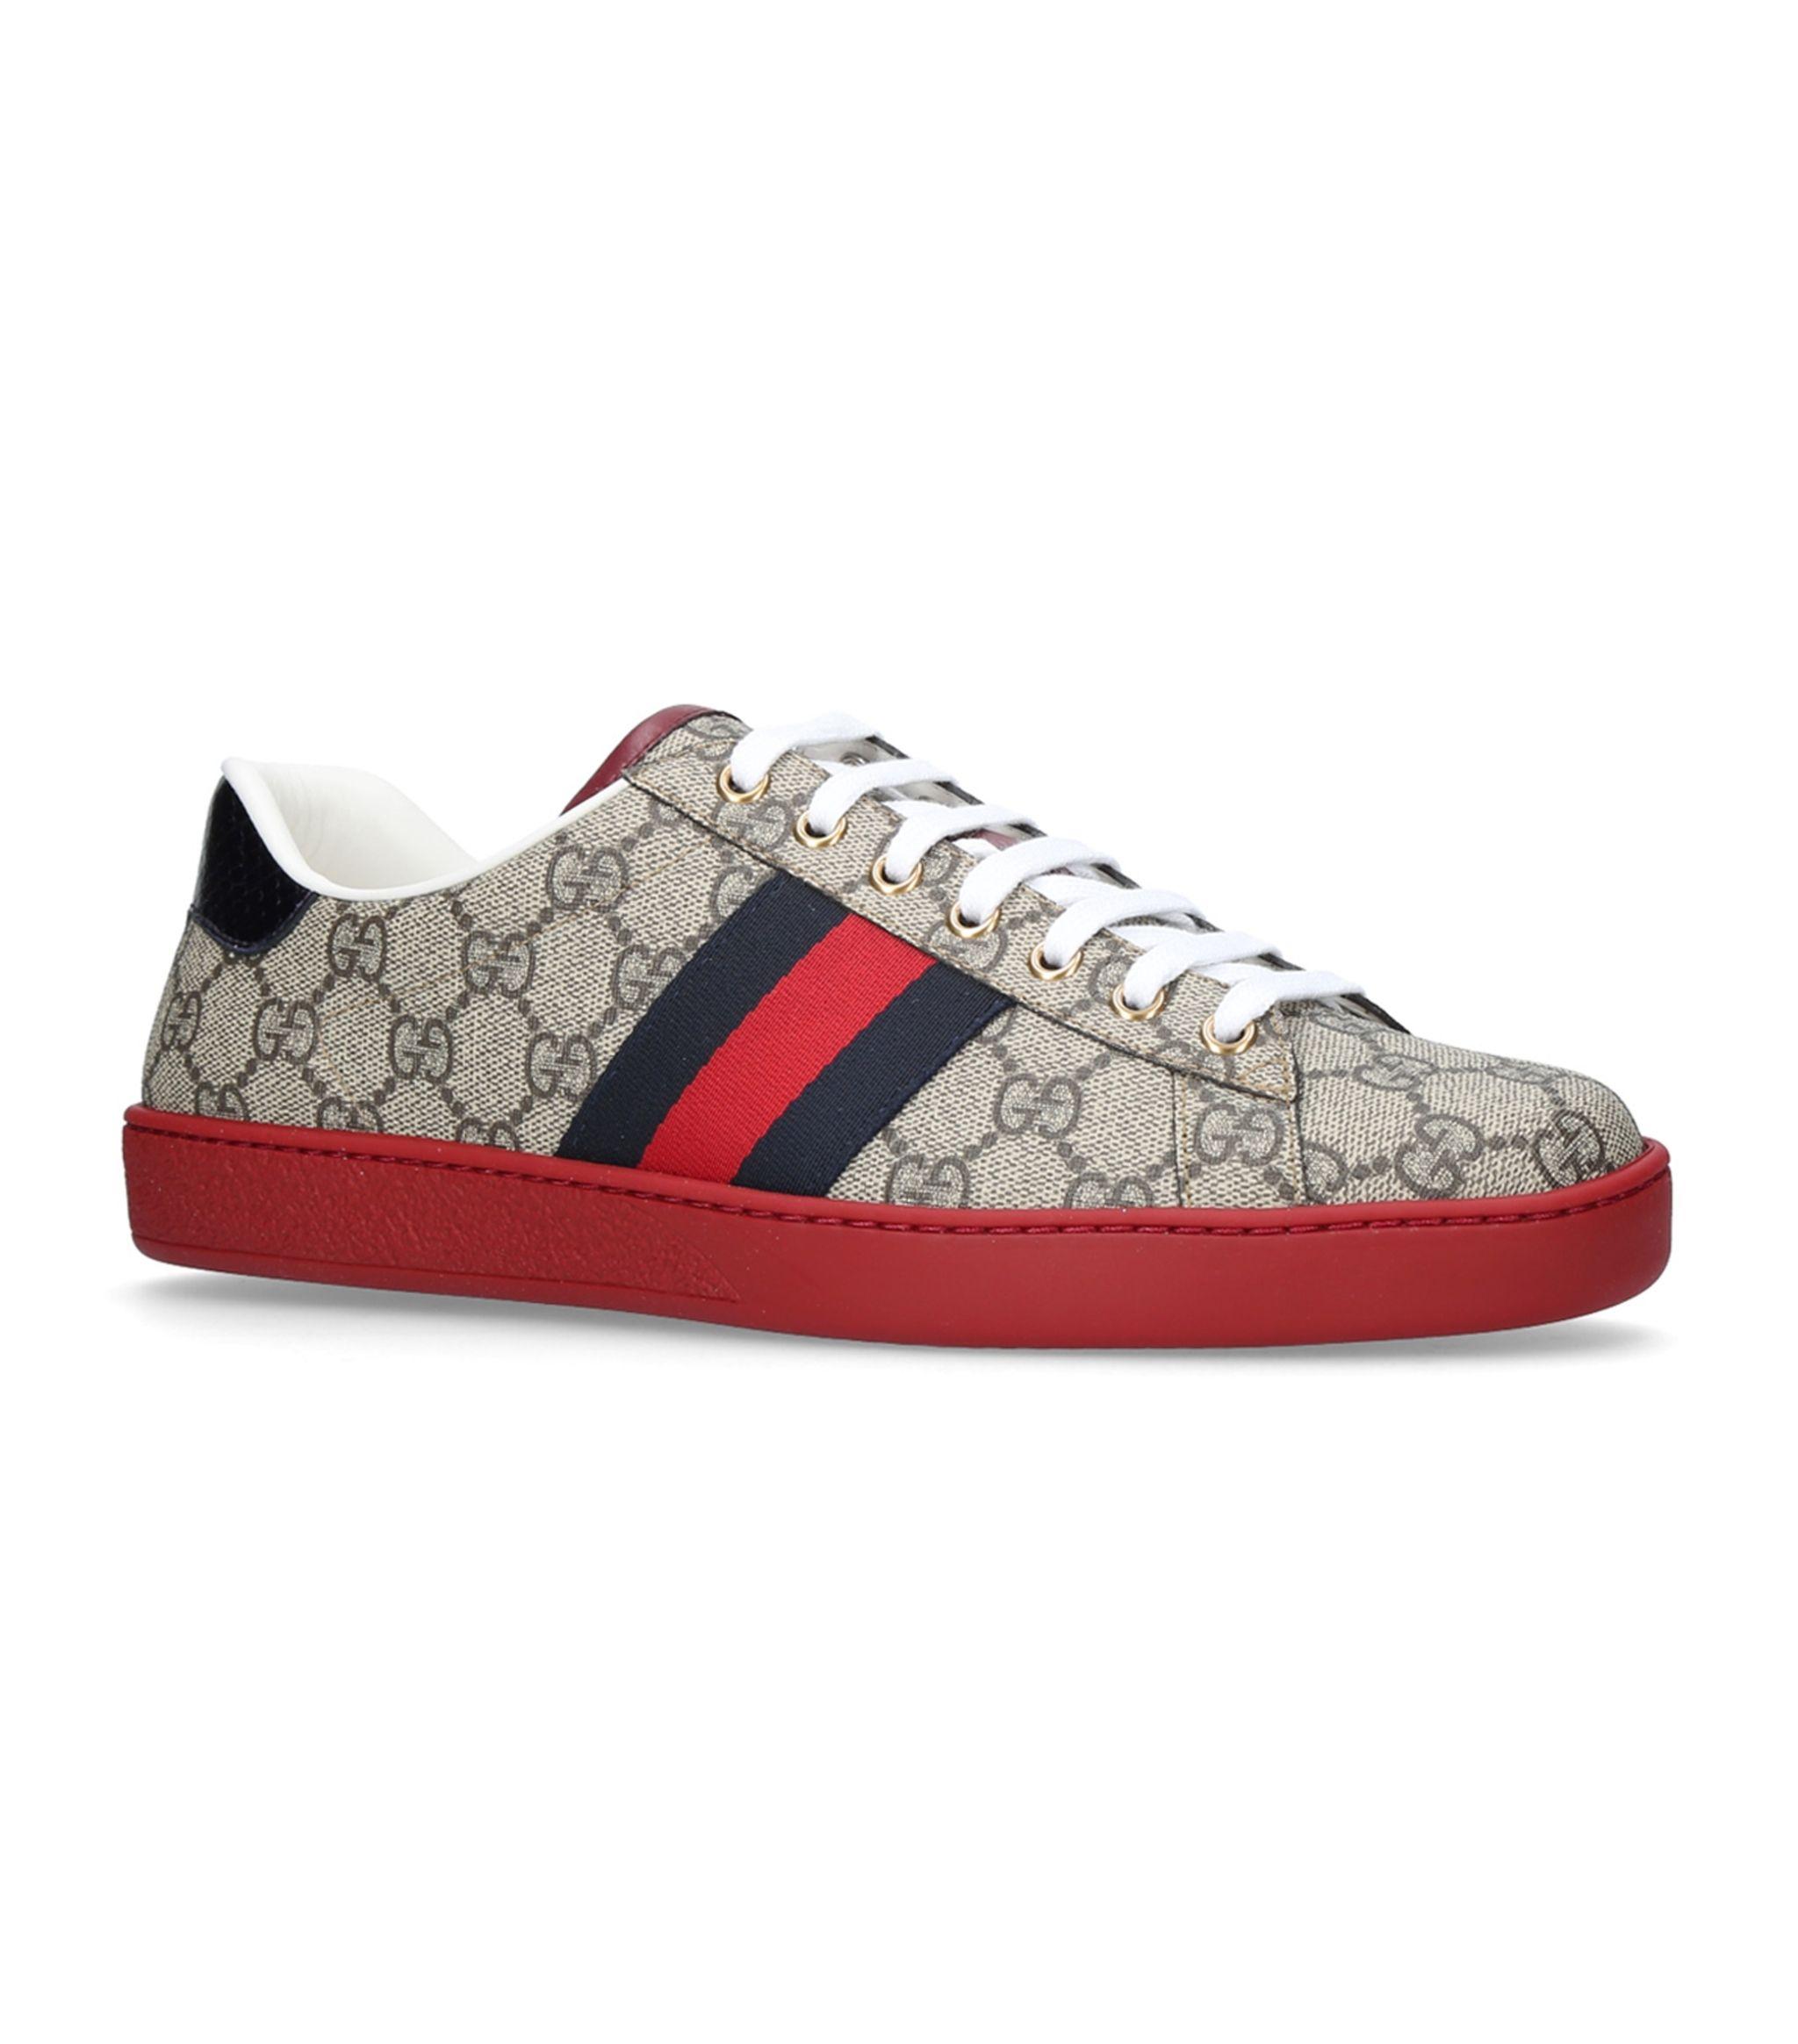 Gucci Ace GG Supreme Canvas Sneaker in Red for Men - Save 24% - Lyst